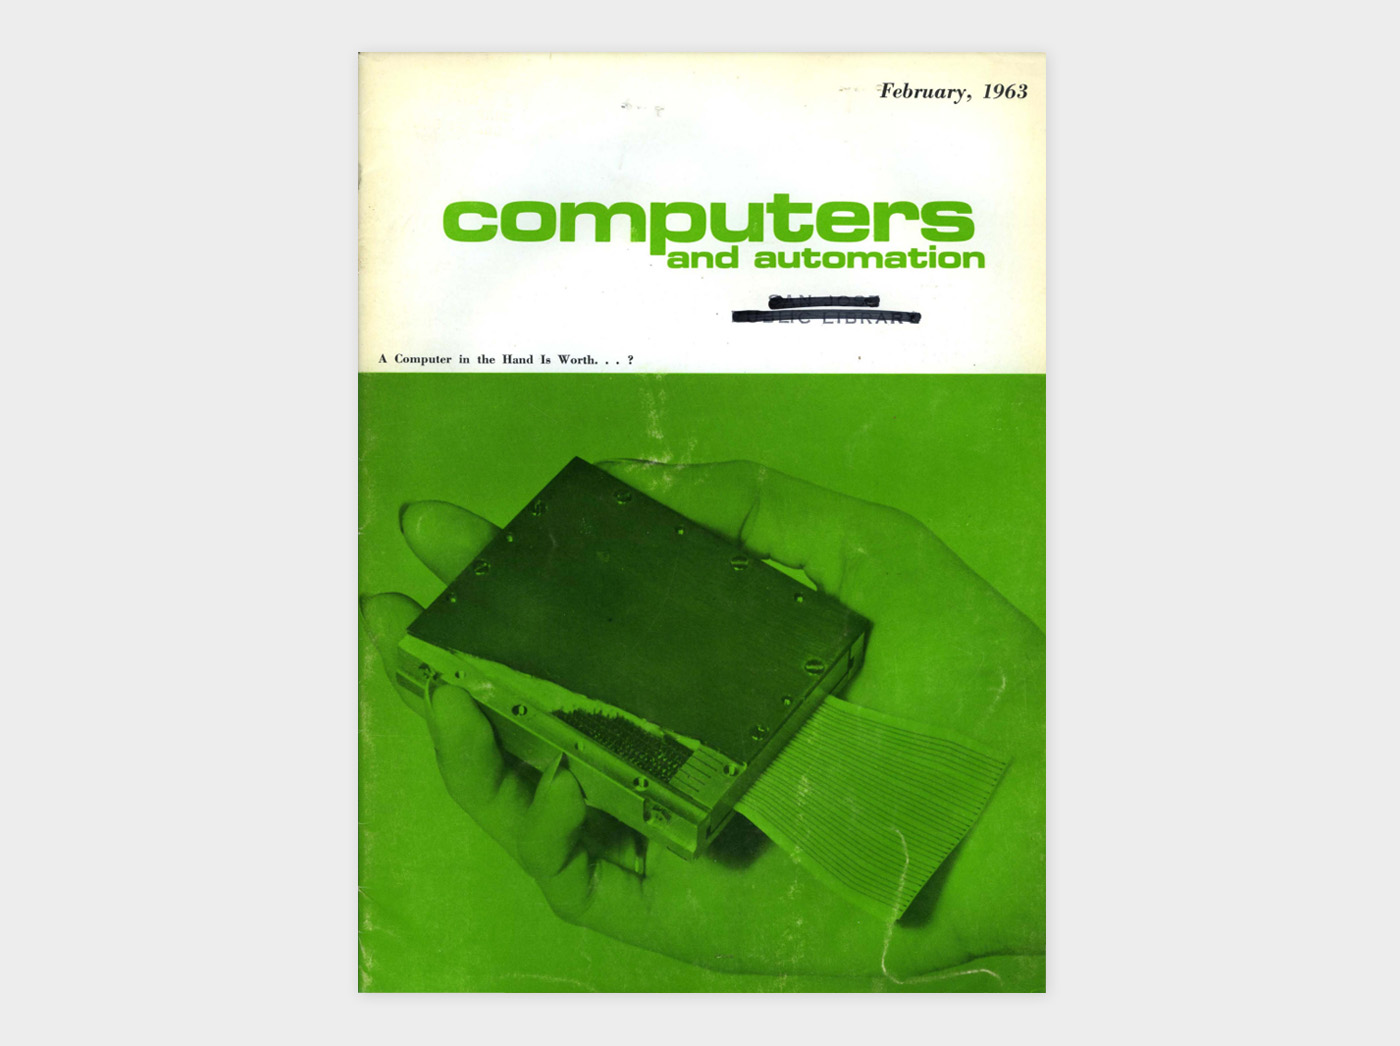 The 1963 cover of Computers and Automation